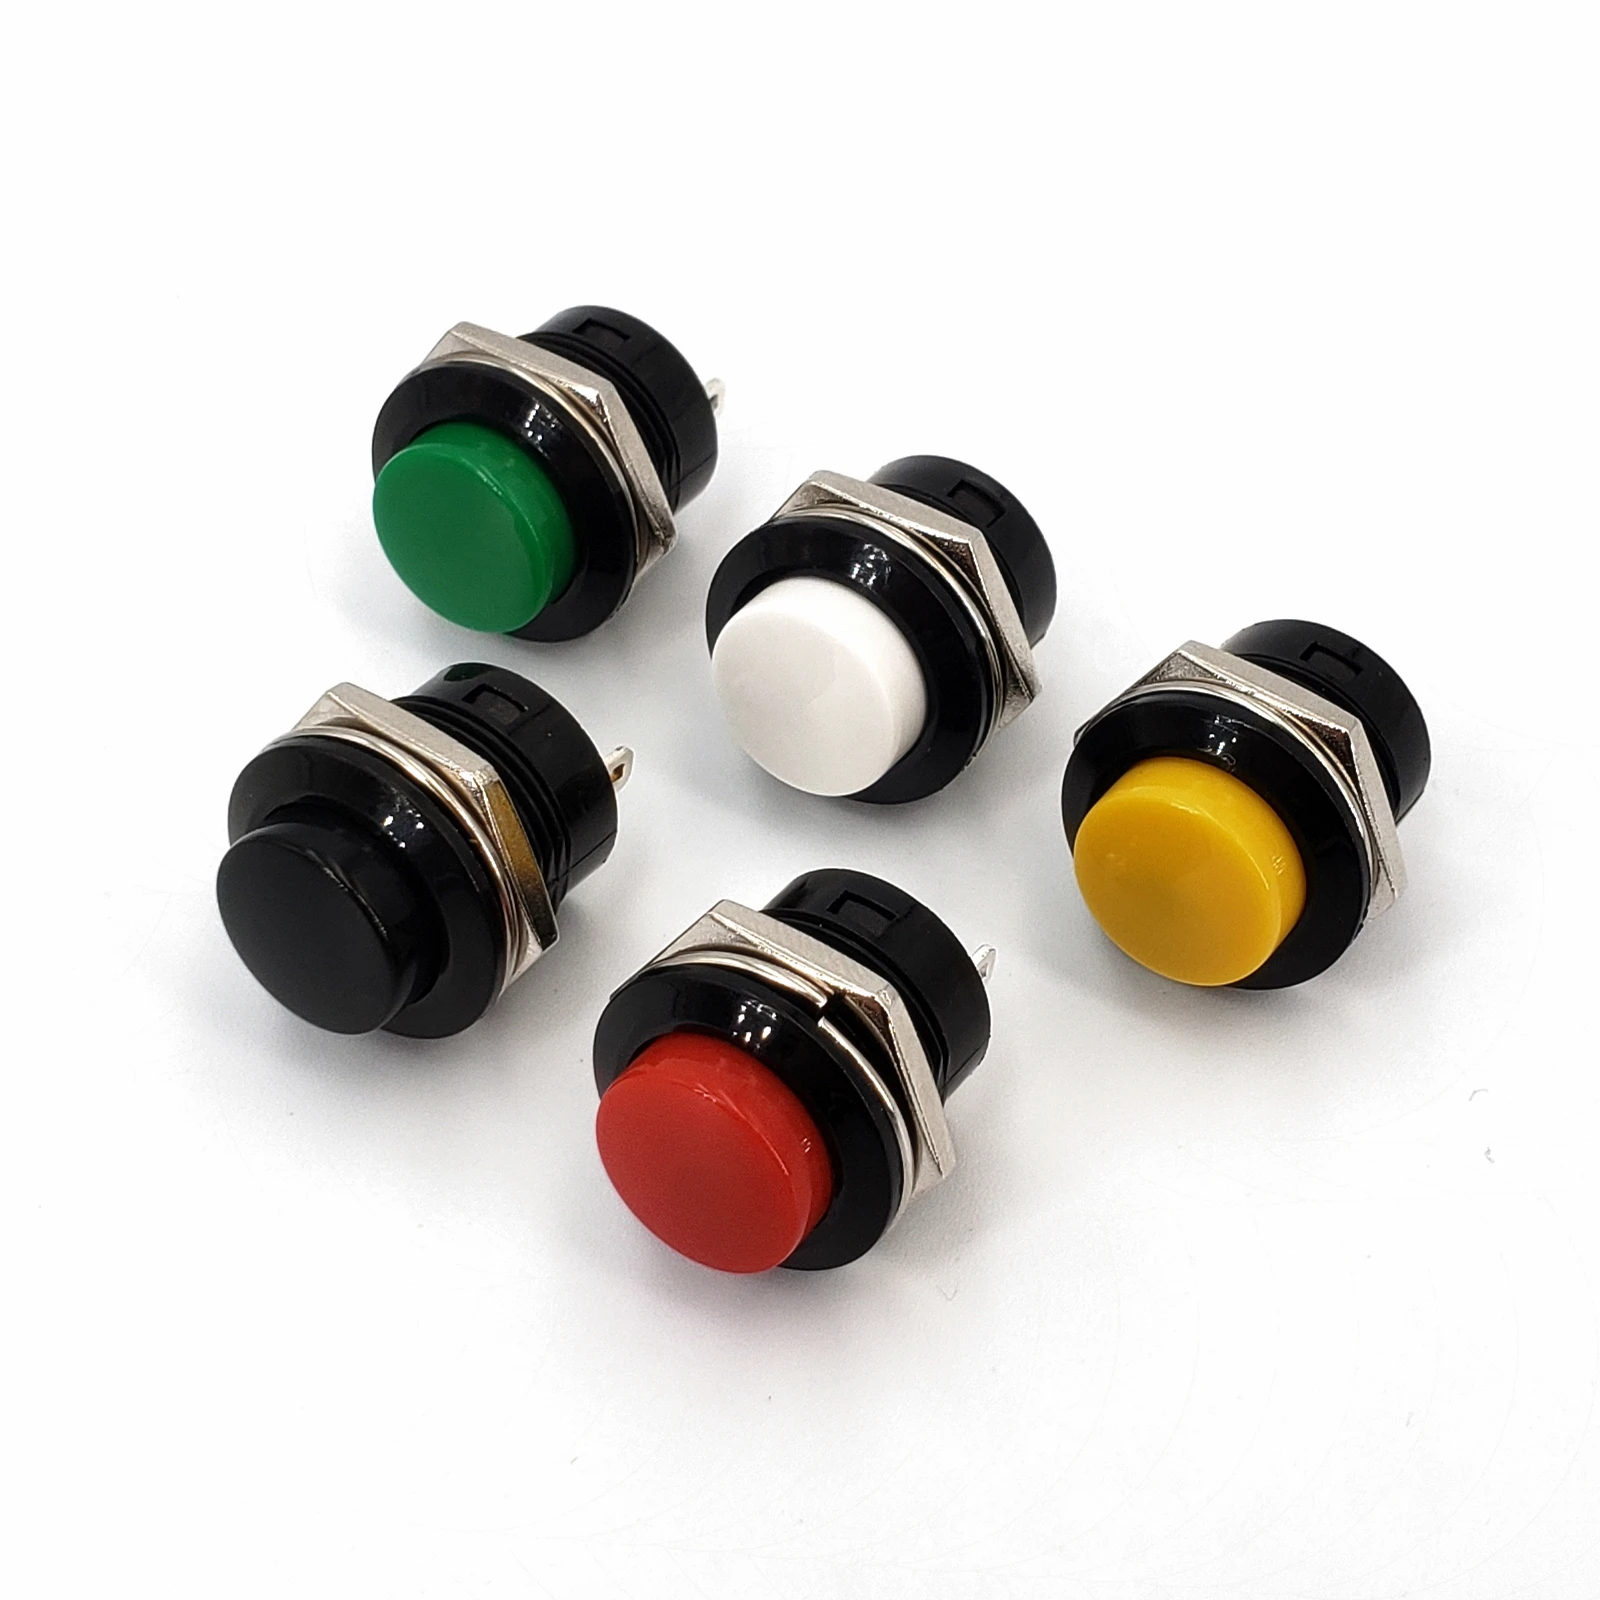 6 OFF/ ON SPST Round Yellow Momentary PushButton Switch Normally Open 